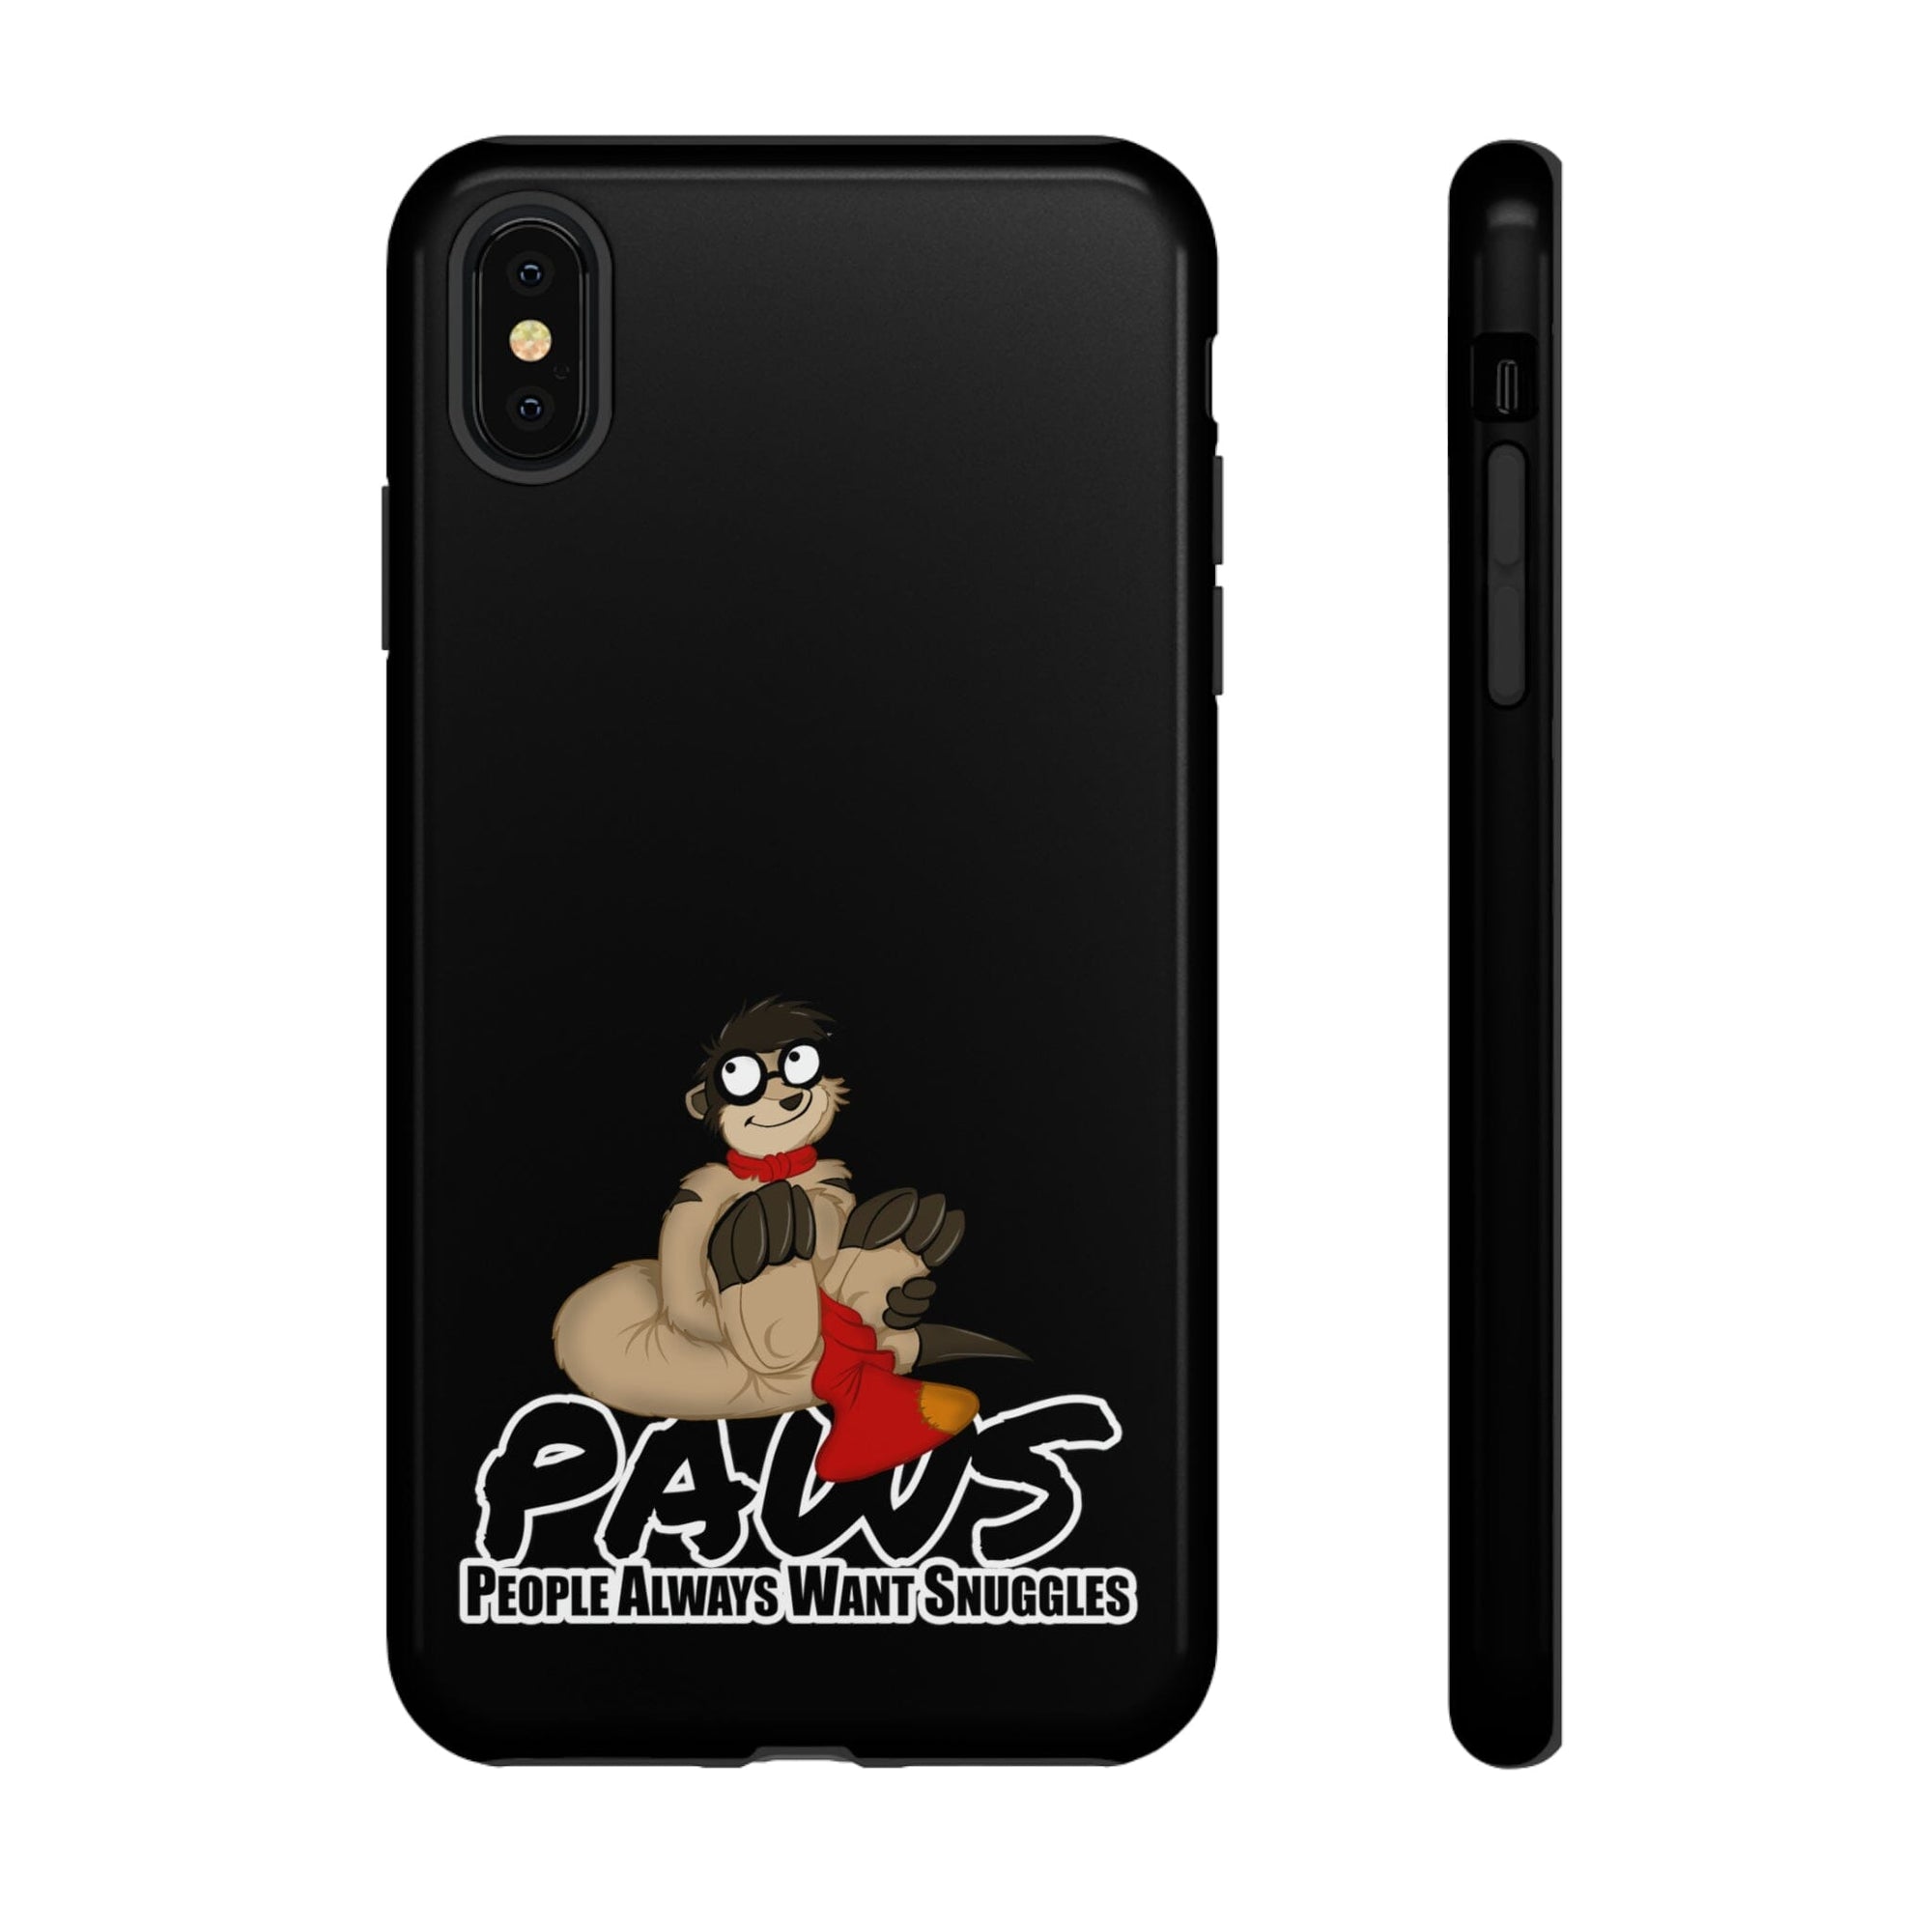 Thabo Meerkat - PAWS - Phone Case Phone Case Thabo Meerkat Glossy iPhone XS MAX 